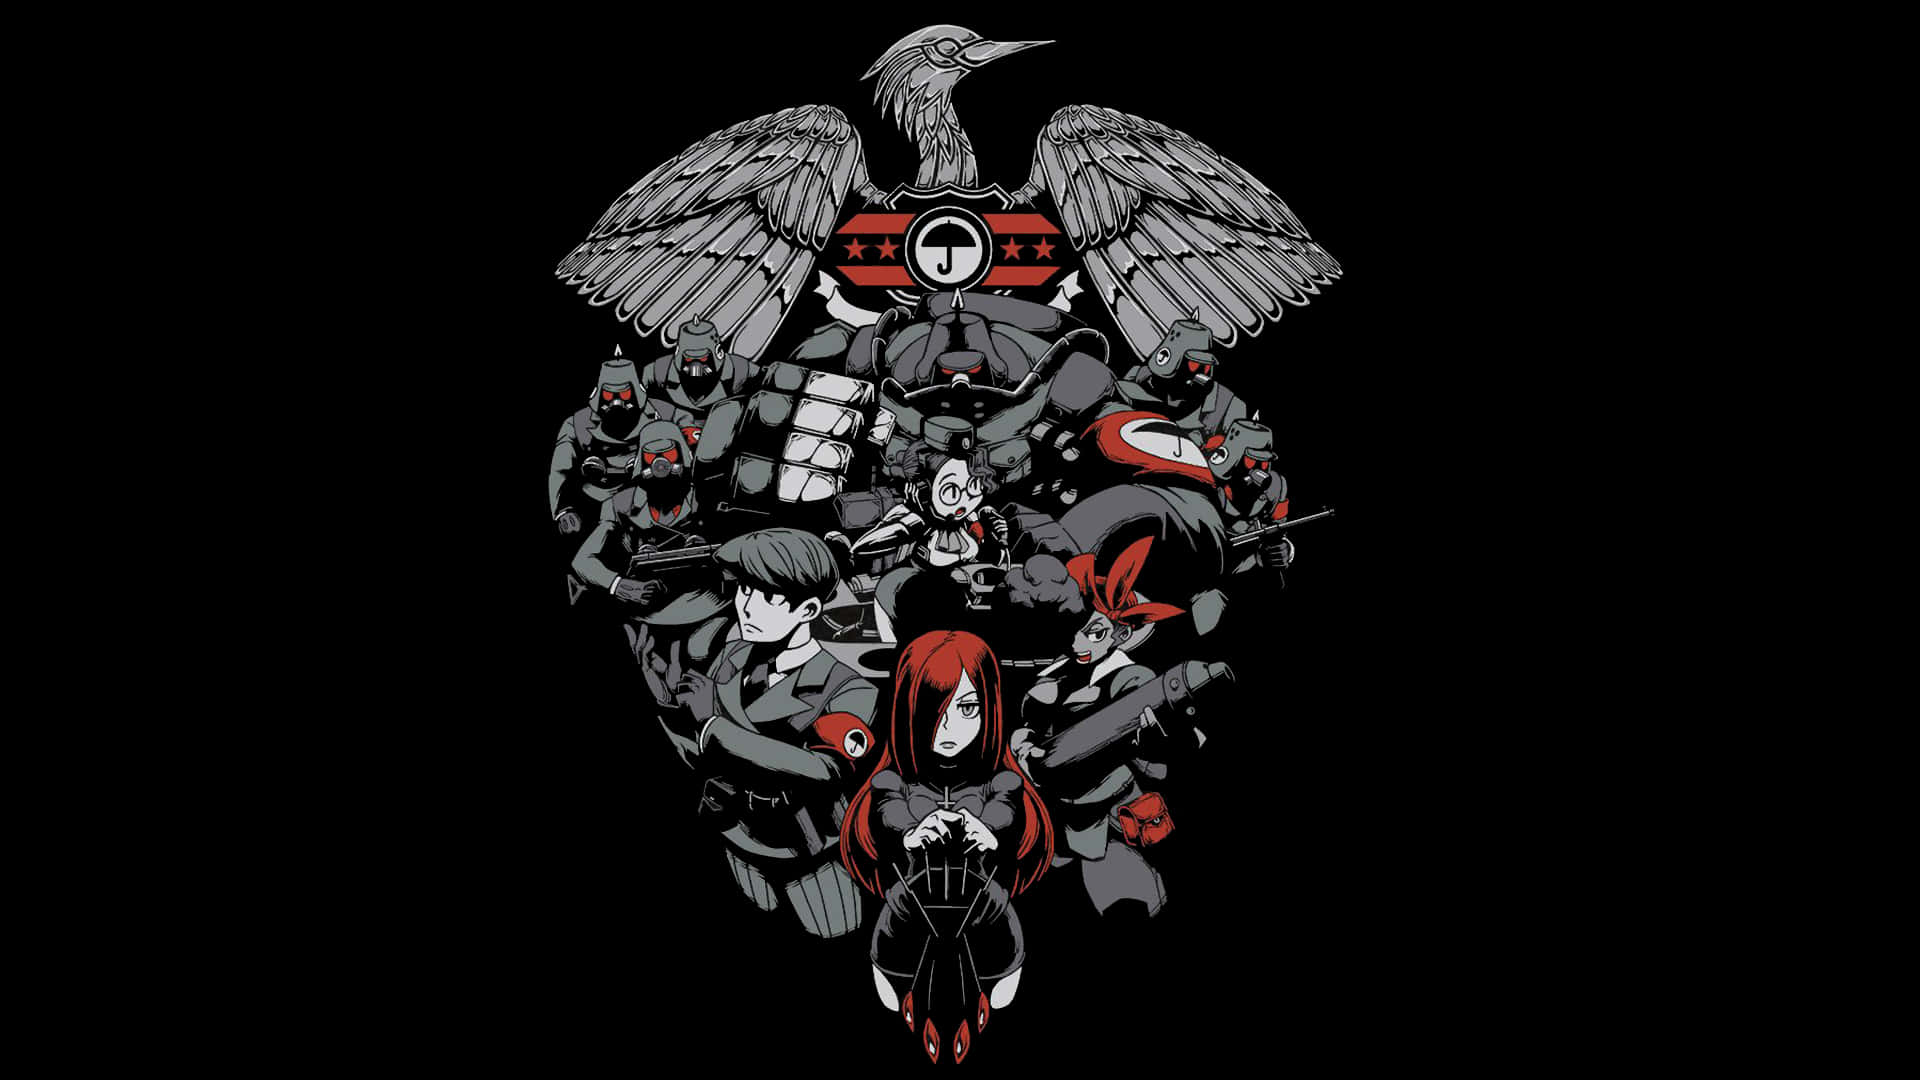 A Black And Red T - Shirt With A Bird On It Wallpaper